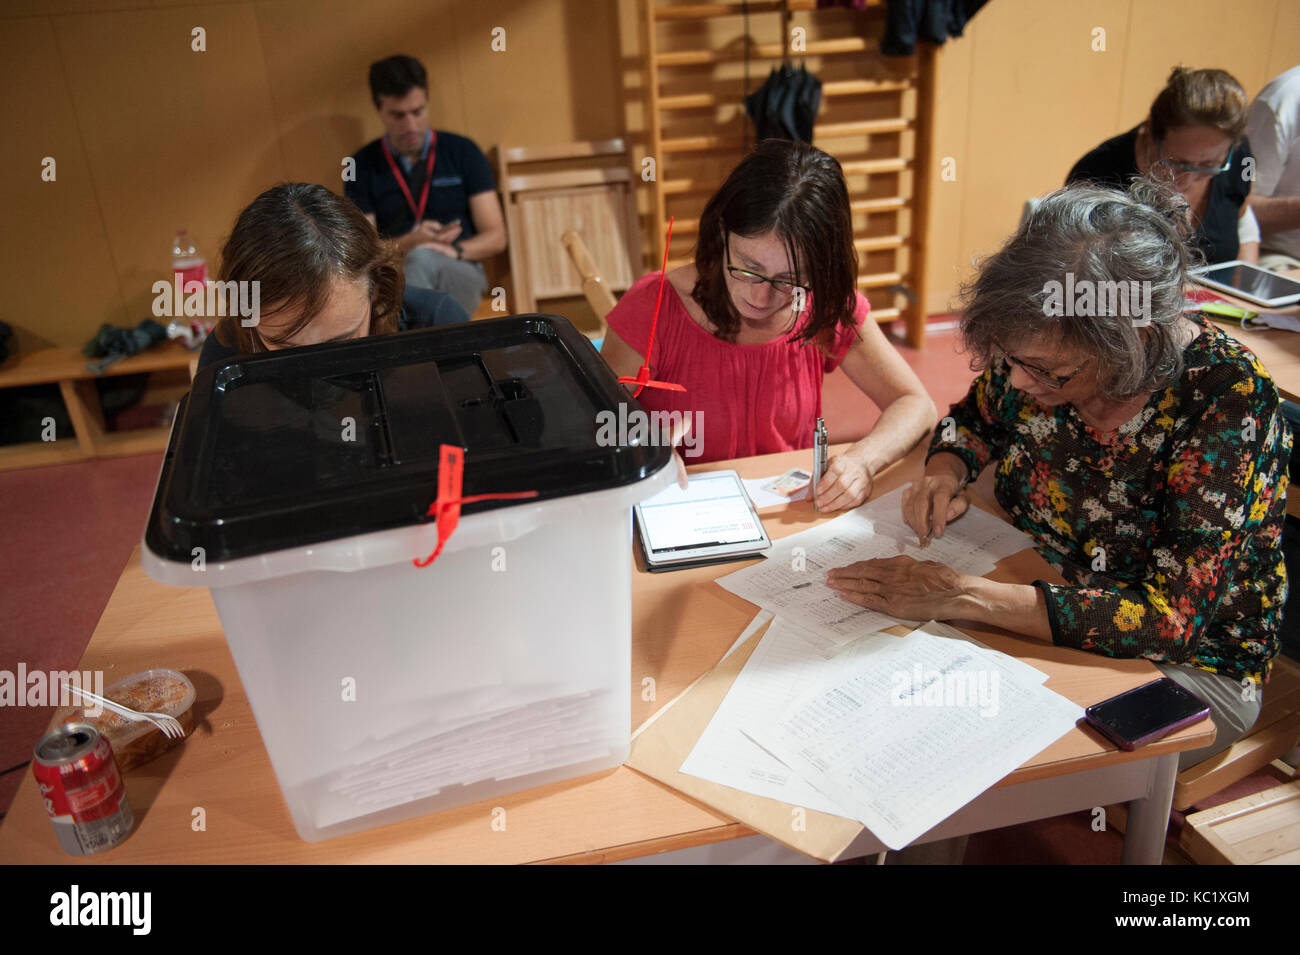 Barcelona, Catalonia. October 1, 2017. The vote counting begins, shuffle data of participation of 3,000,000 people. Credit: Charlie Perez/Alamy Live News Stock Photo